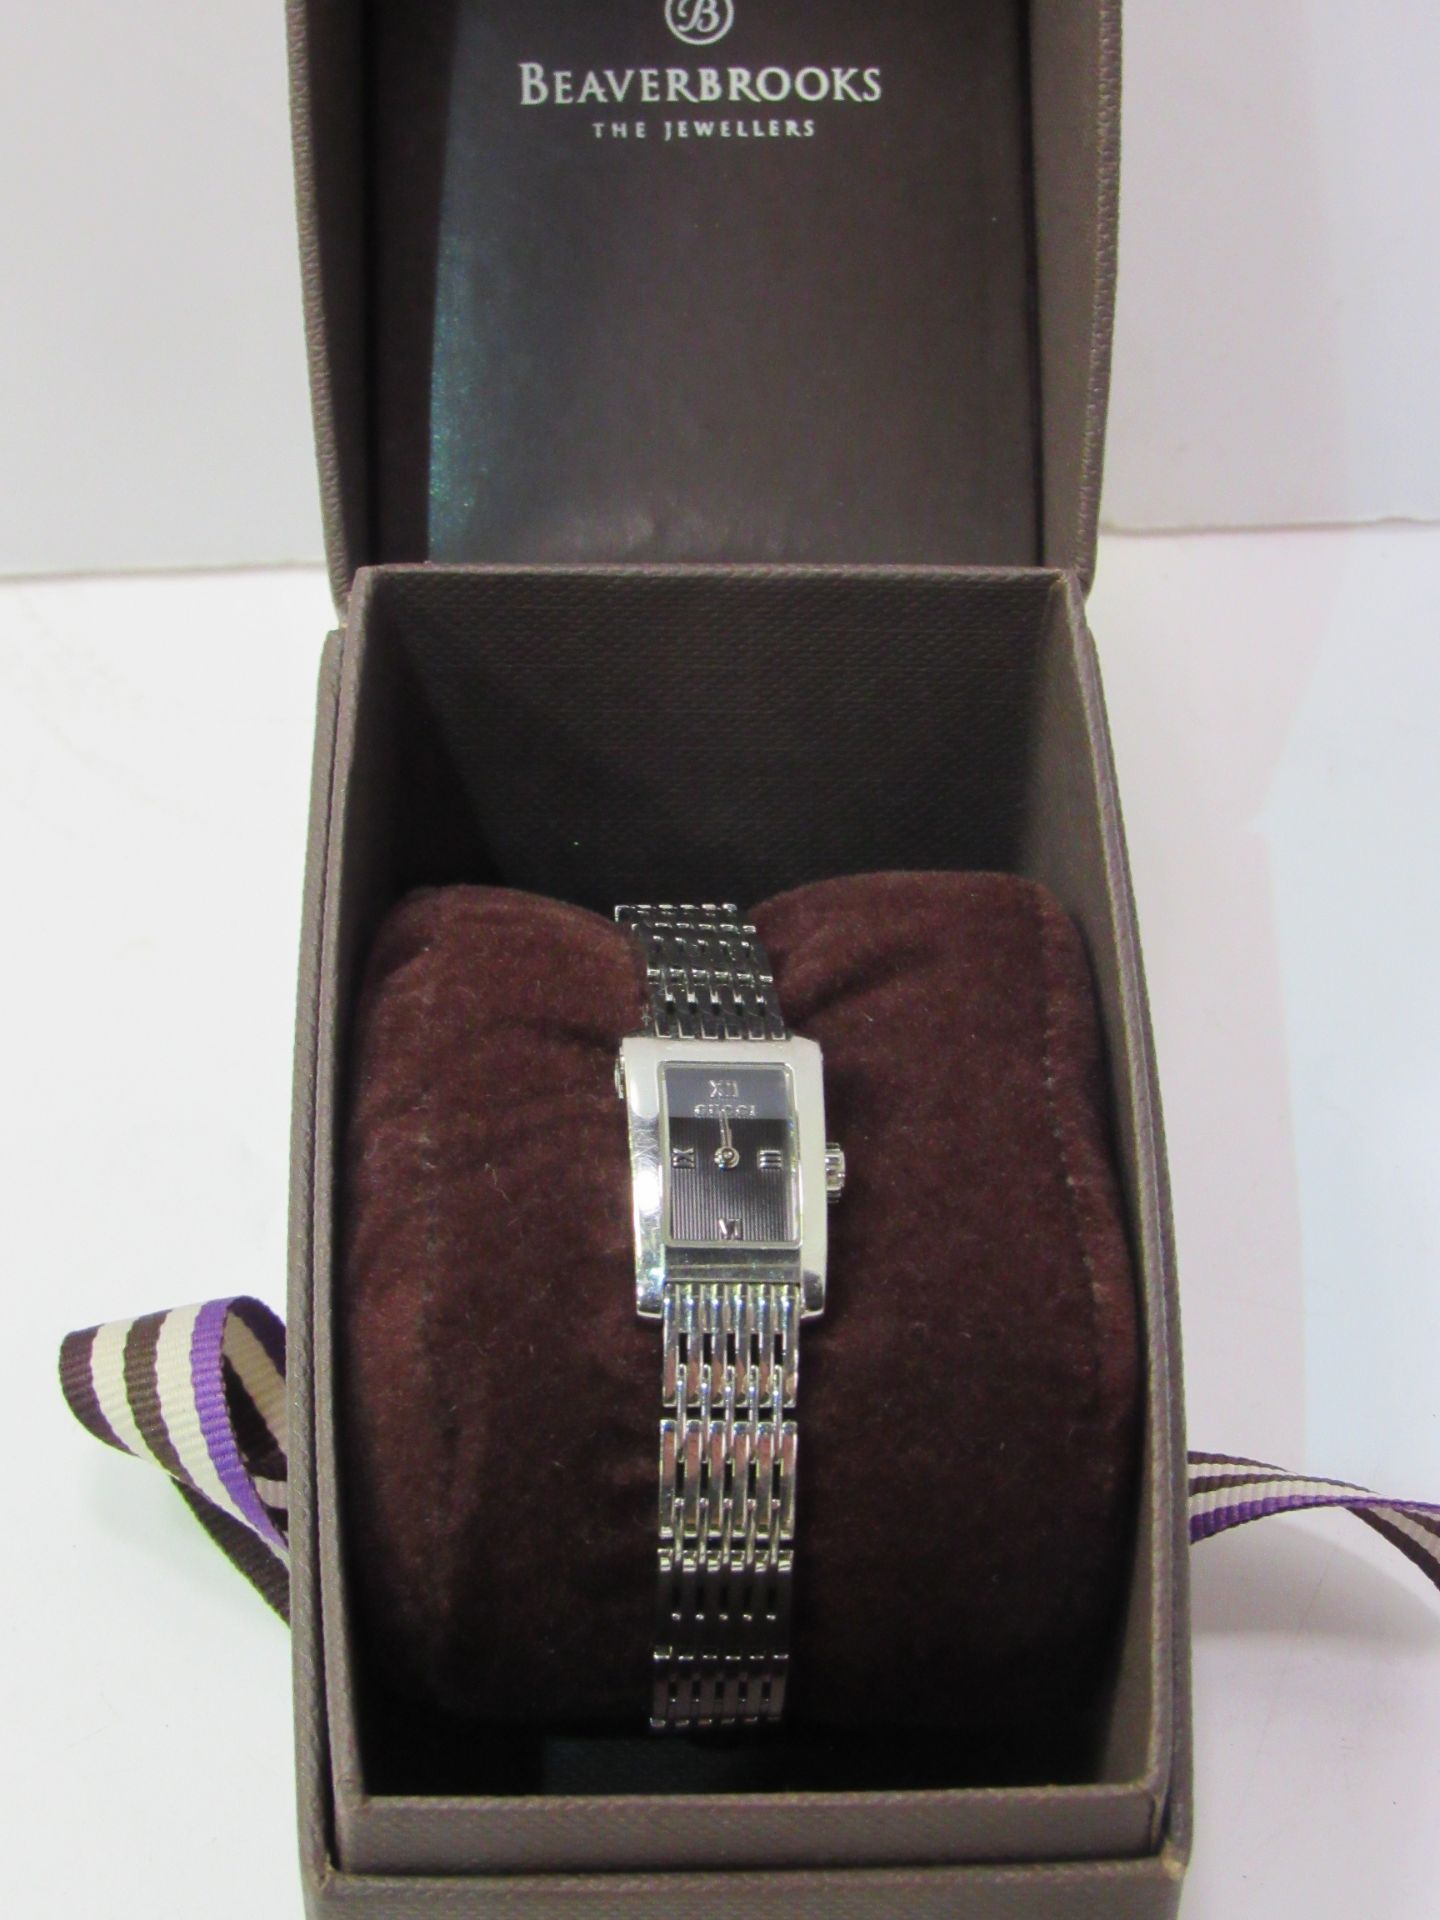 Gucci Lady's Dress Watch, having code number, in jeweller's display box. Estimate £30-50. - Image 2 of 2